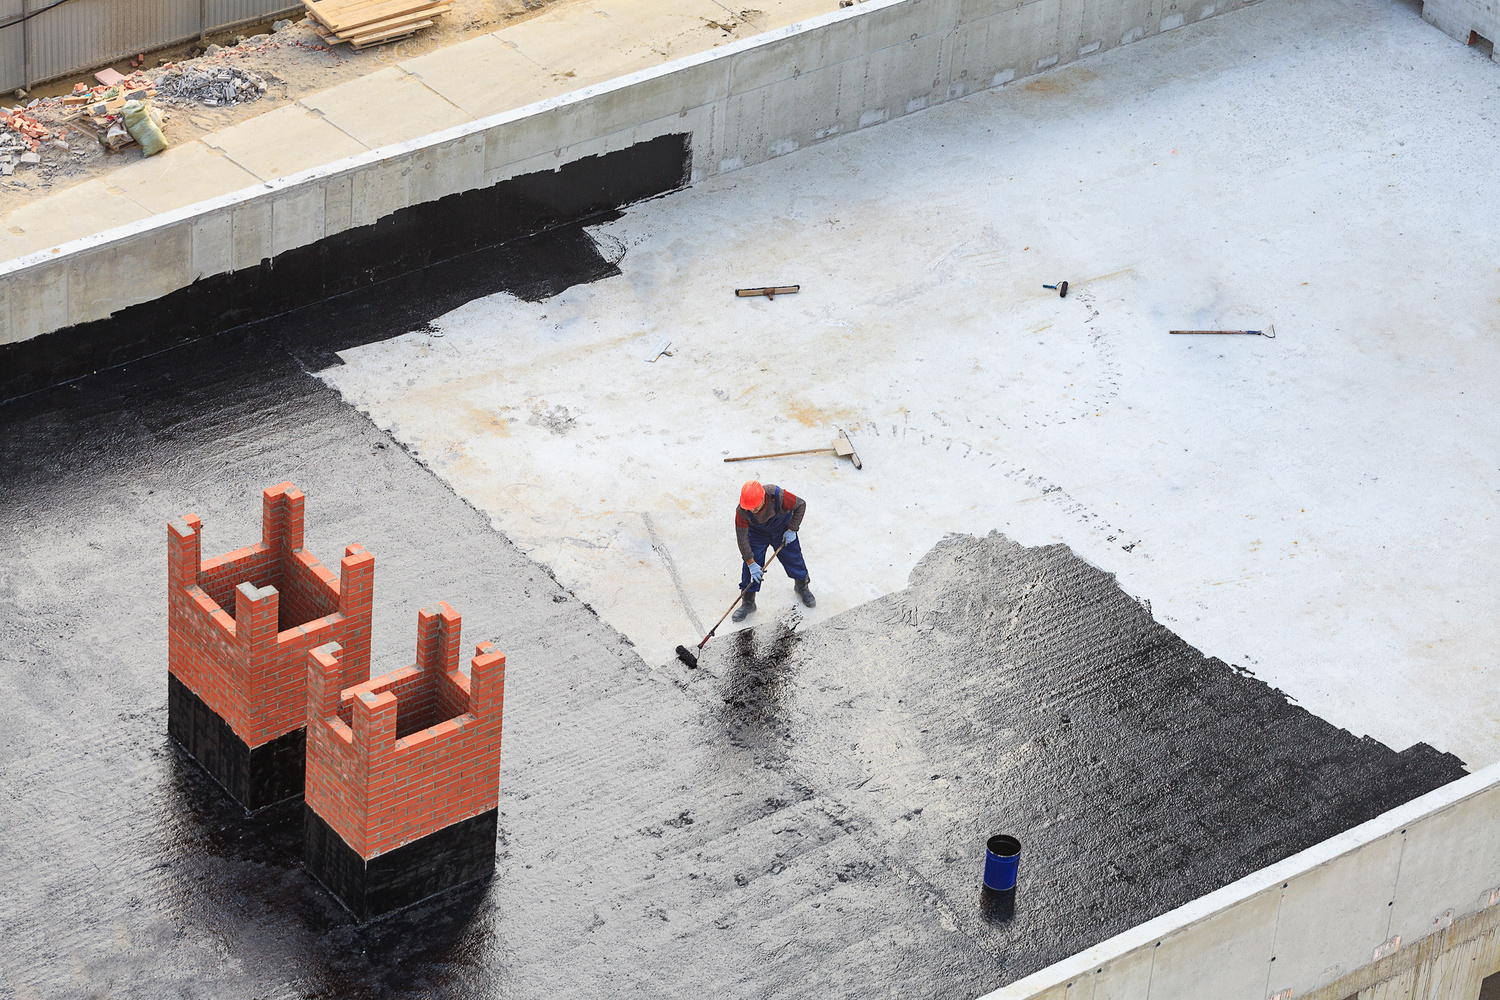 Workers conduct waterproofing of the roof with bitumen.